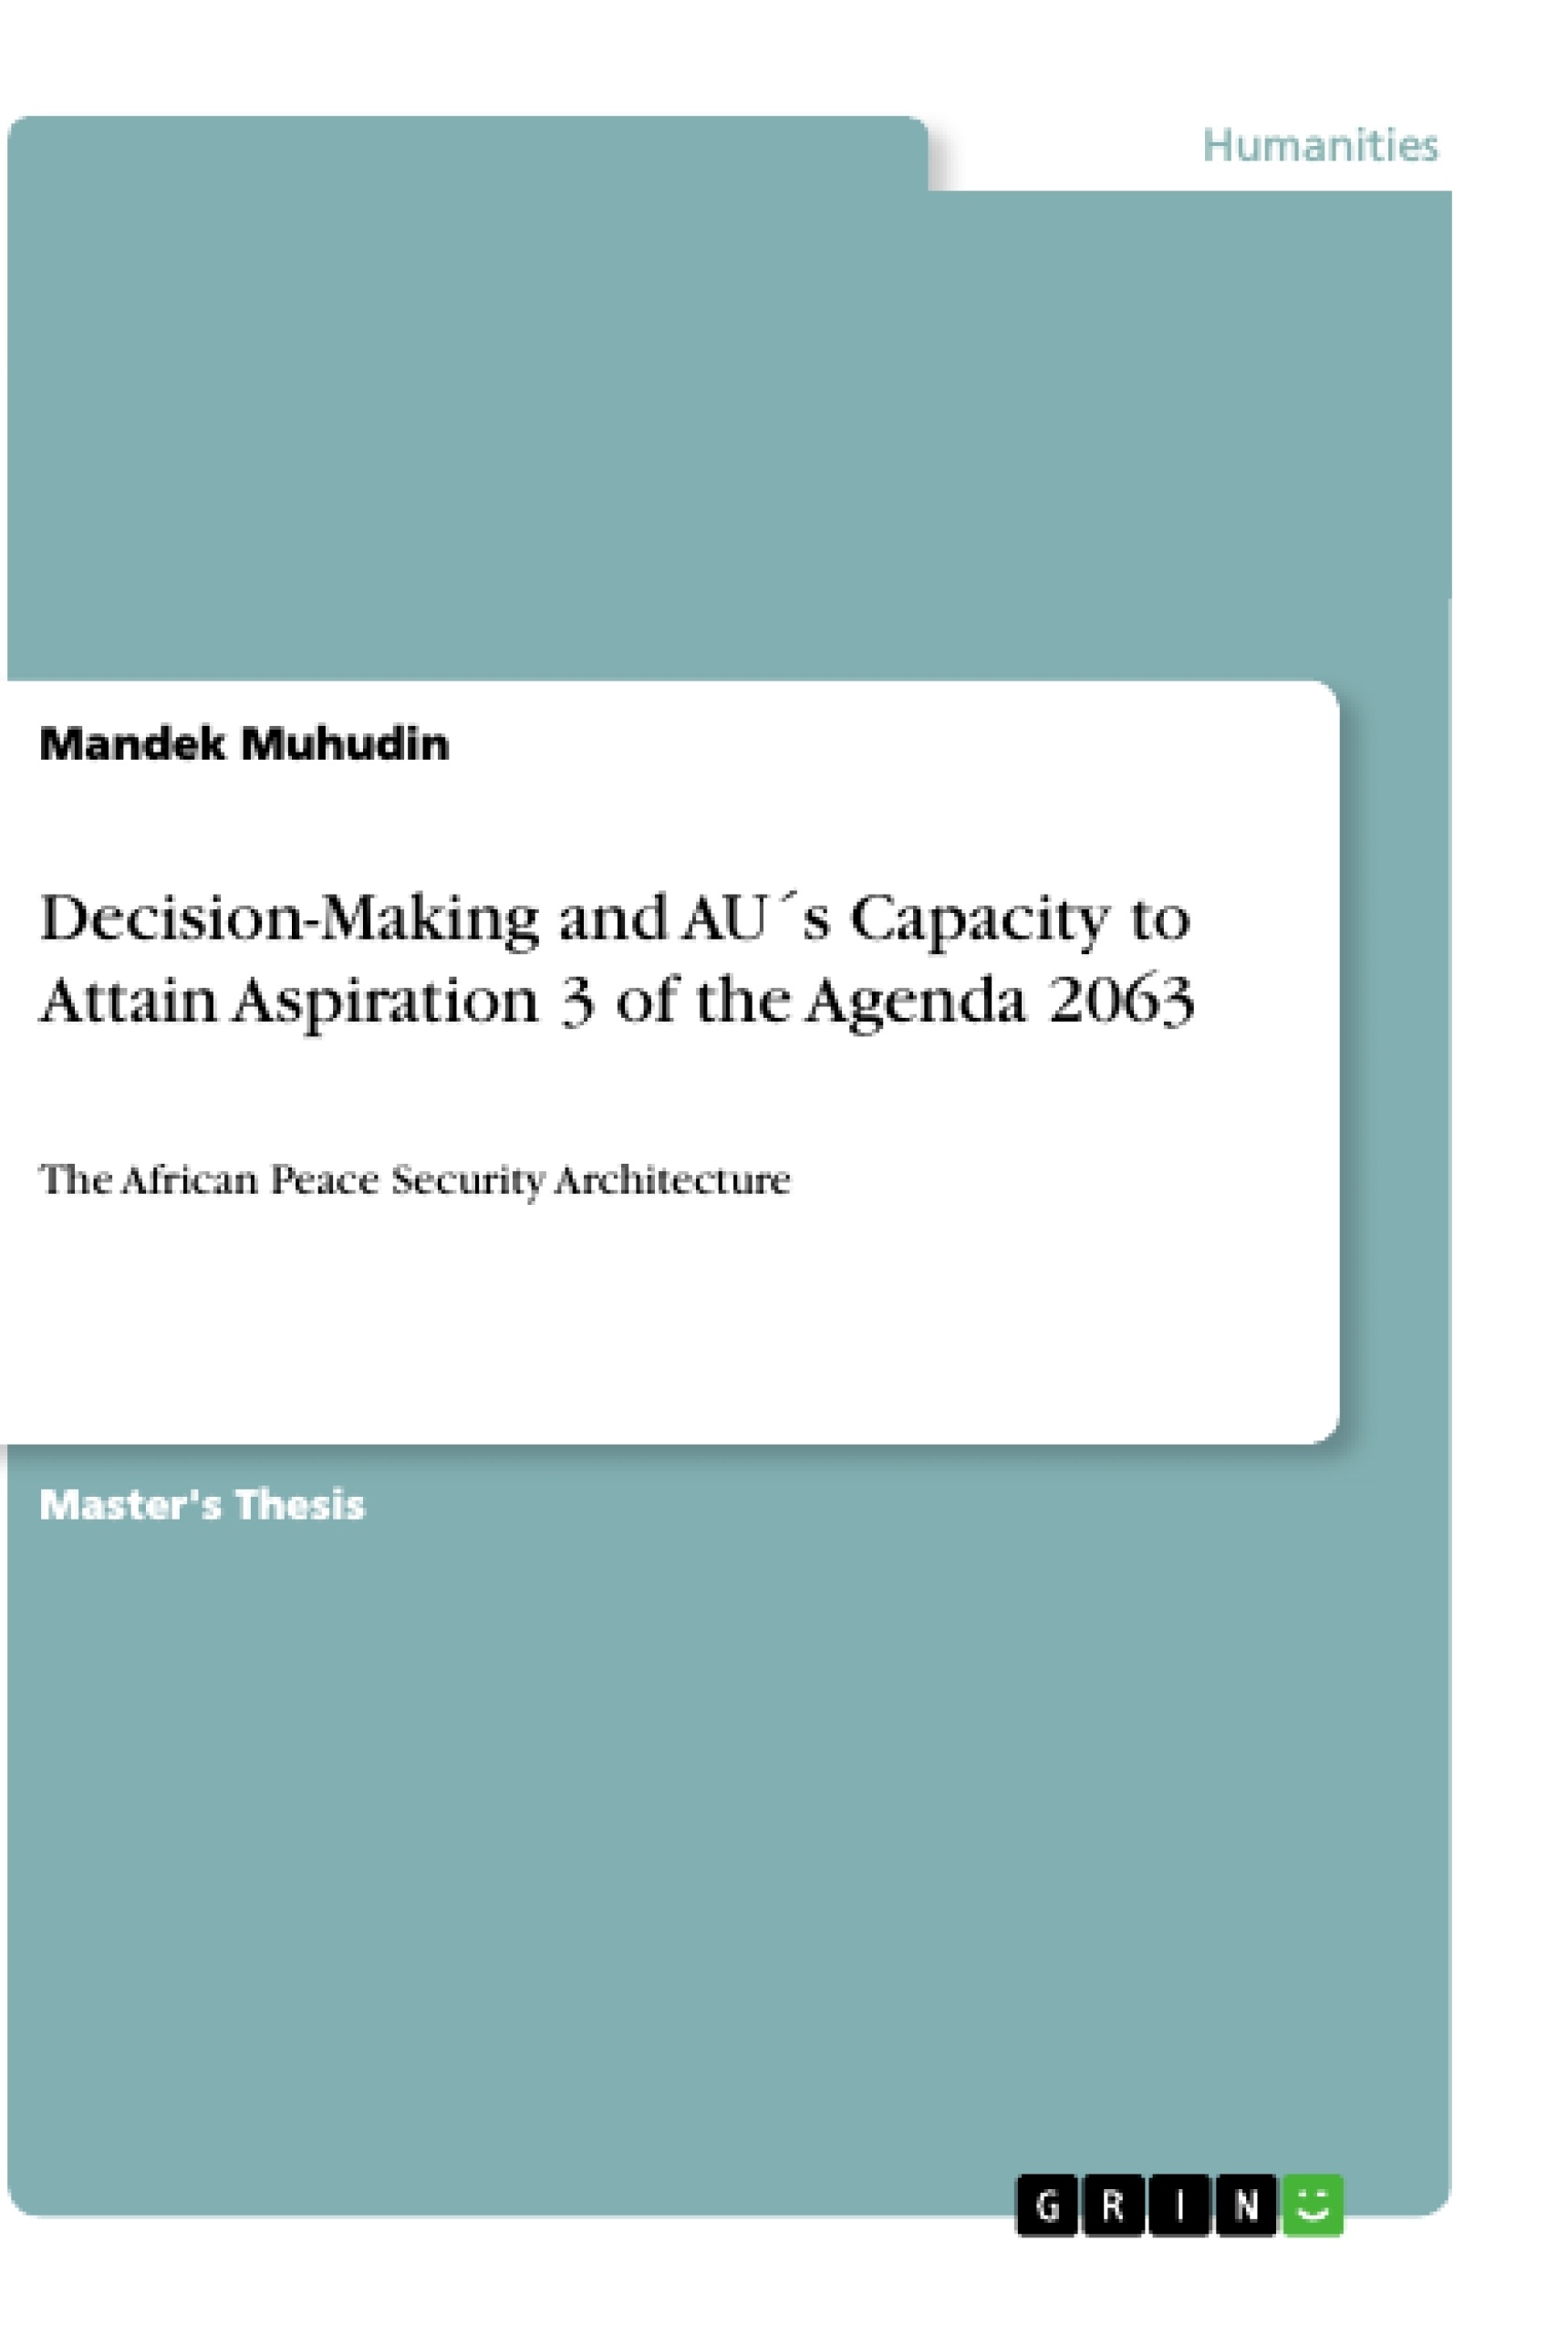 Title: Decision-Making and AU´s Capacity to Attain Aspiration 3 of the Agenda 2063